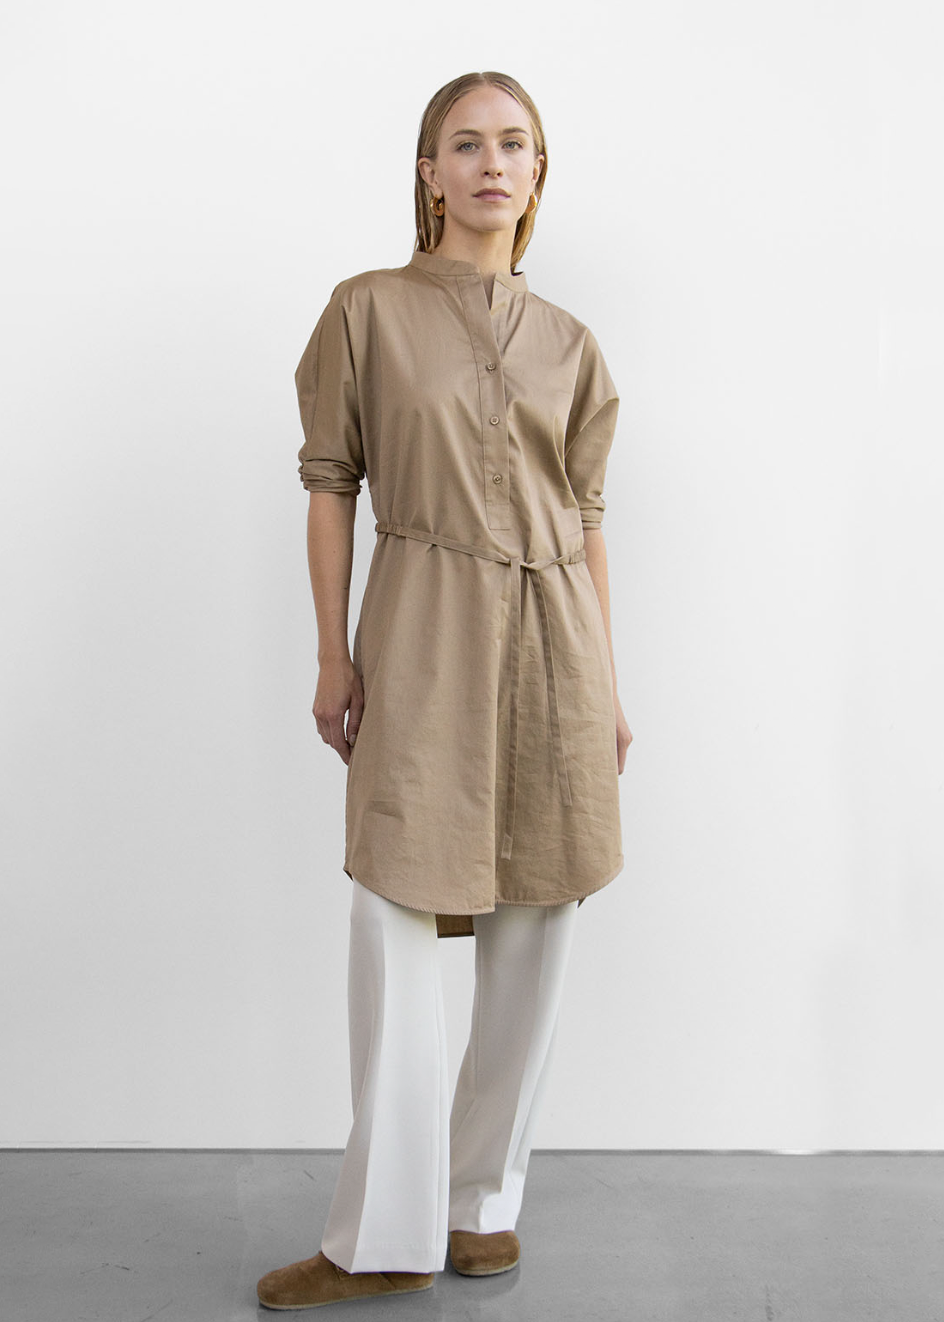 Tunic Dress Kristy, Desert Taupe With Black